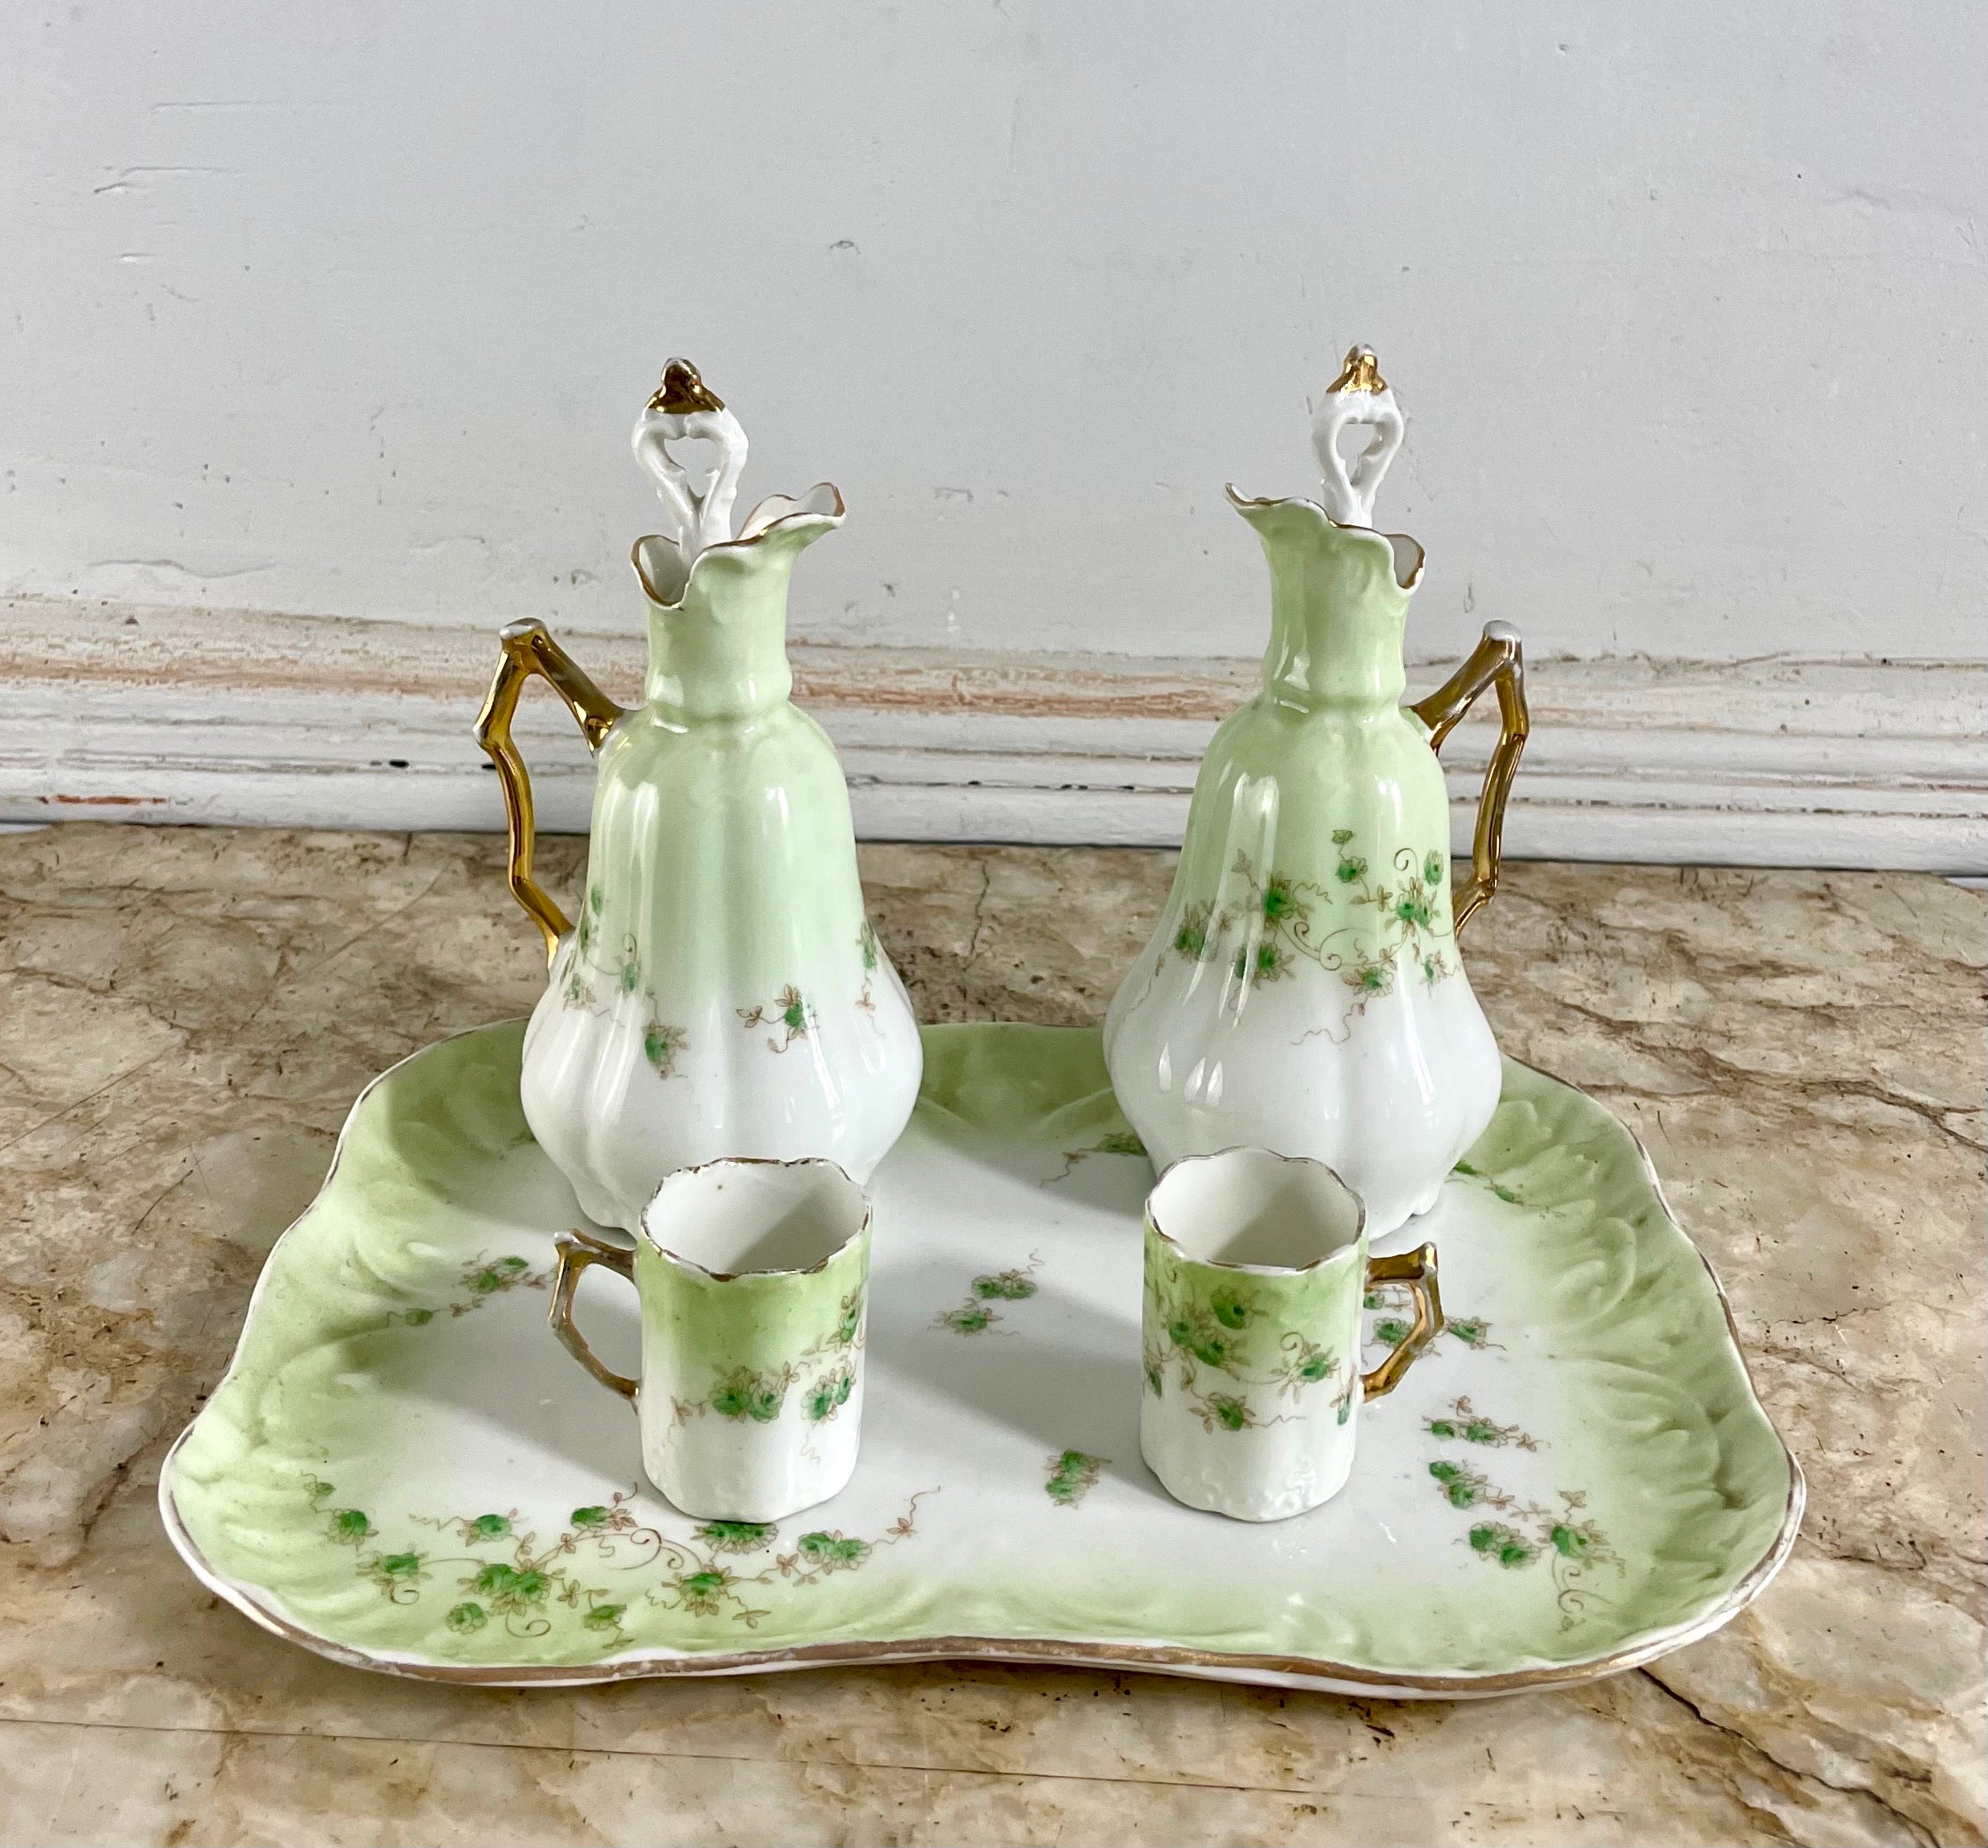 White porcelain liquor service with green and gold floral decoration including an eventful tray, two ewer bottles with their stoppers and two small cups with handles, mugs.
Floral decor. Golden borders and gilding.
French porcelain. Paris